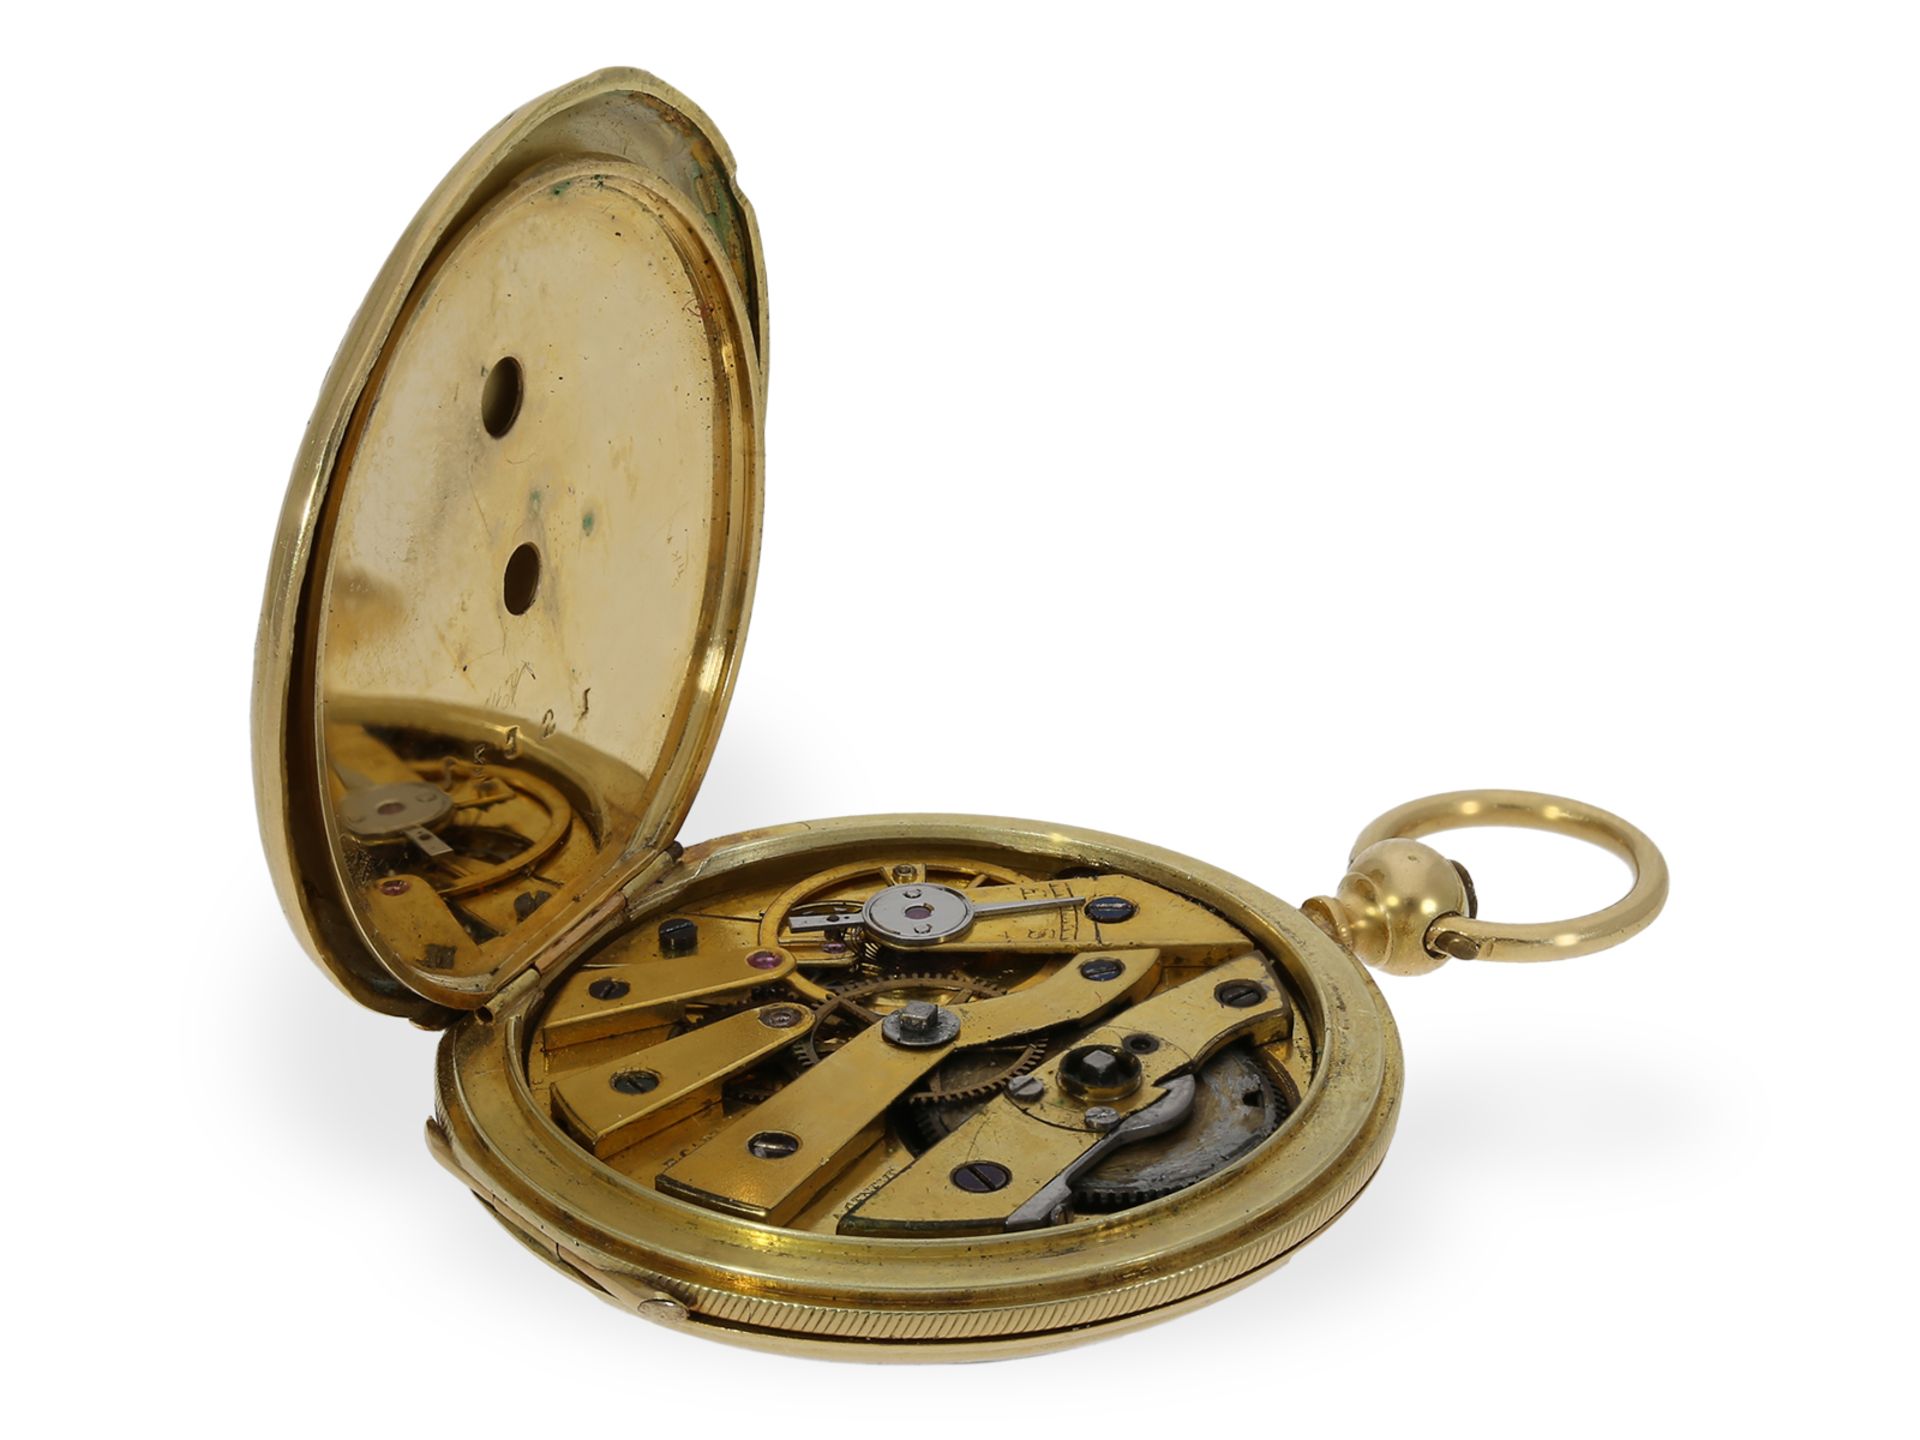 Pocket watch: top-quality gold/enamel hunting case watch, Henry Capt Geneve, ca. 1830 - Image 7 of 10